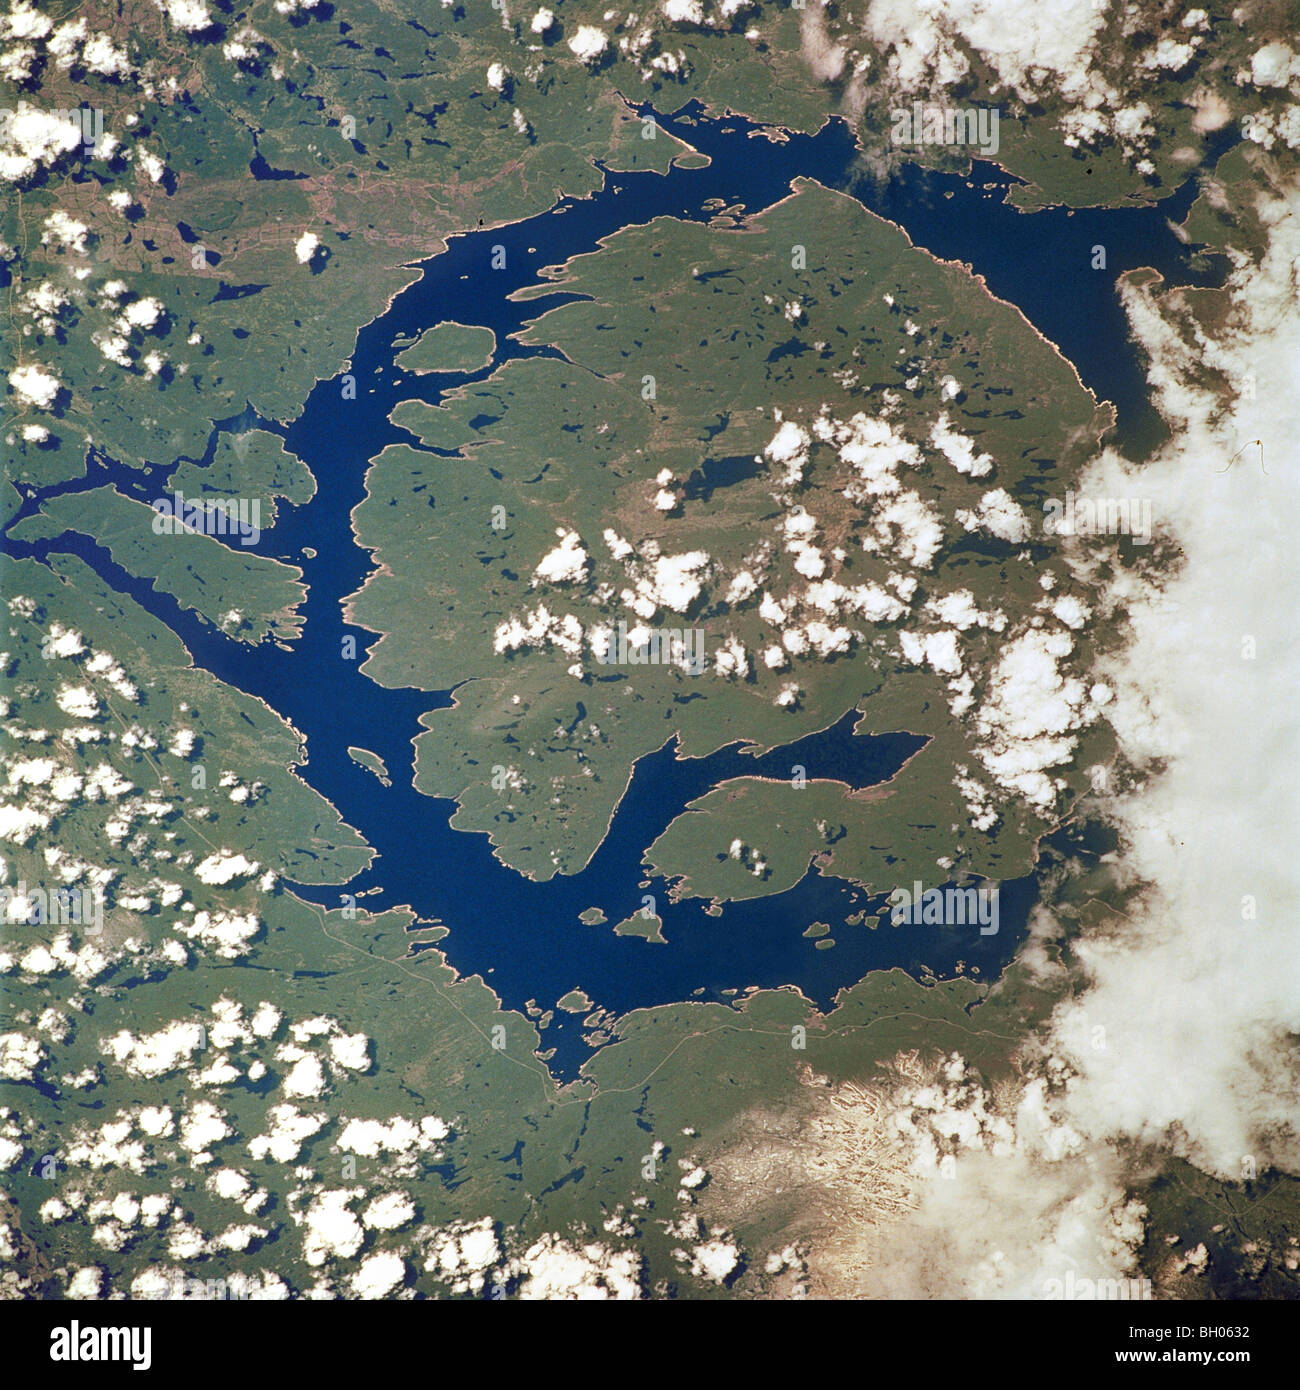 Manicouagan Reservoir in Quebec marks the site of an impact crater, 60 miles (100 km) wide. Stock Photo